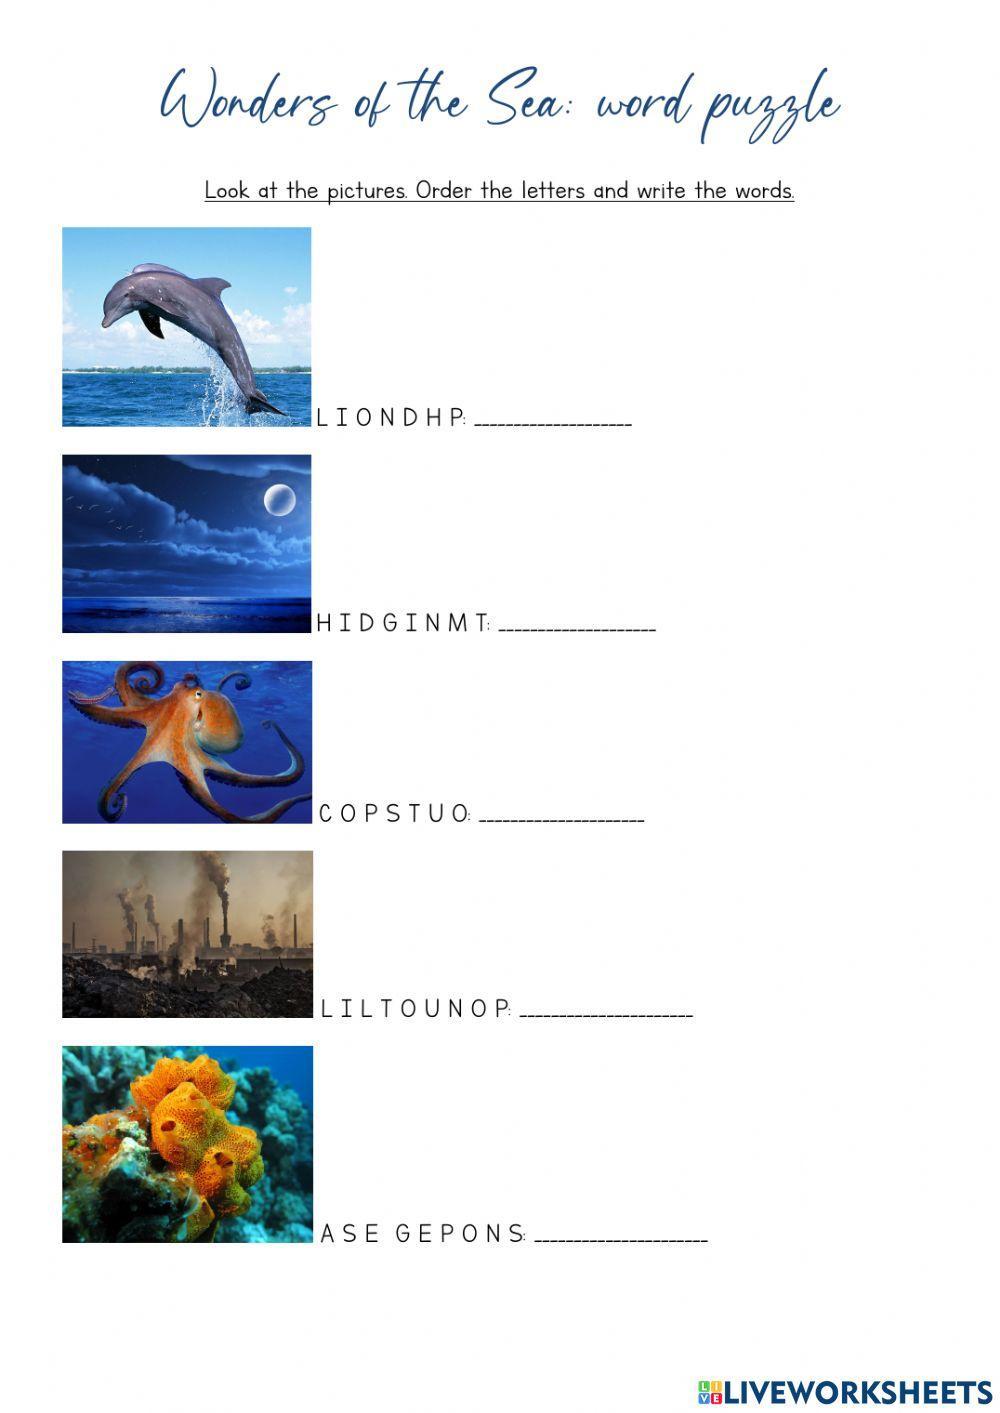 Wonders of the sea: word puzzle